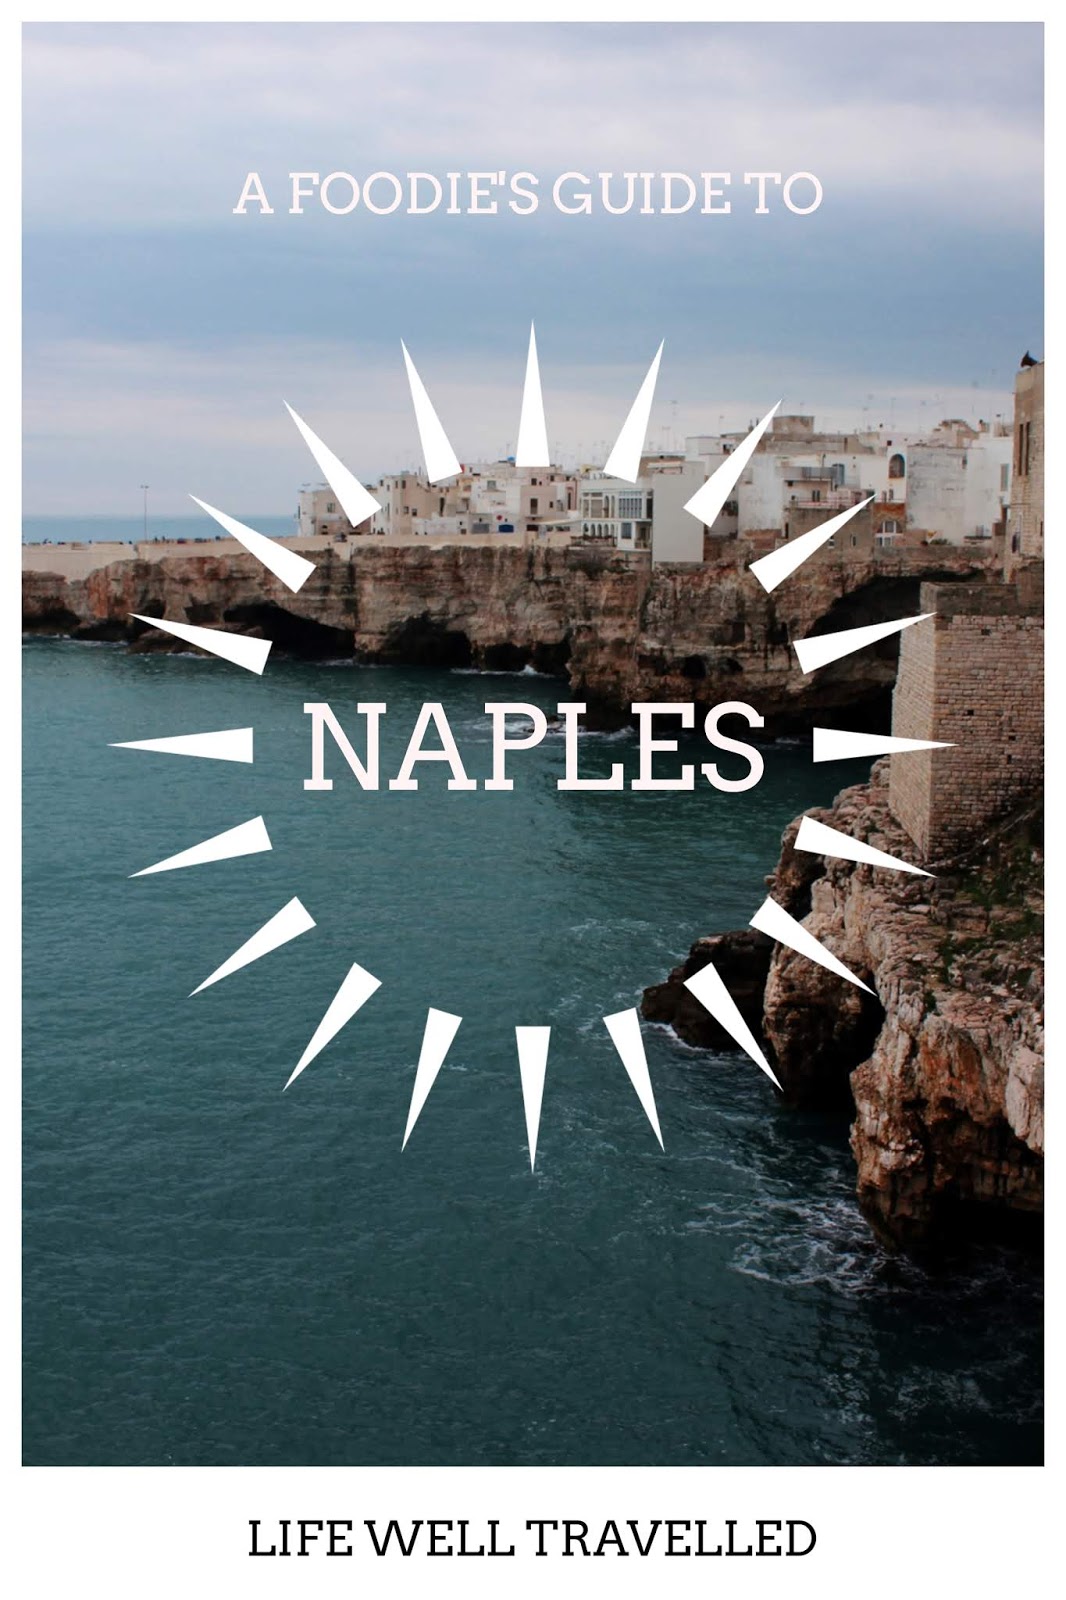 A foodie’s guide to Naples